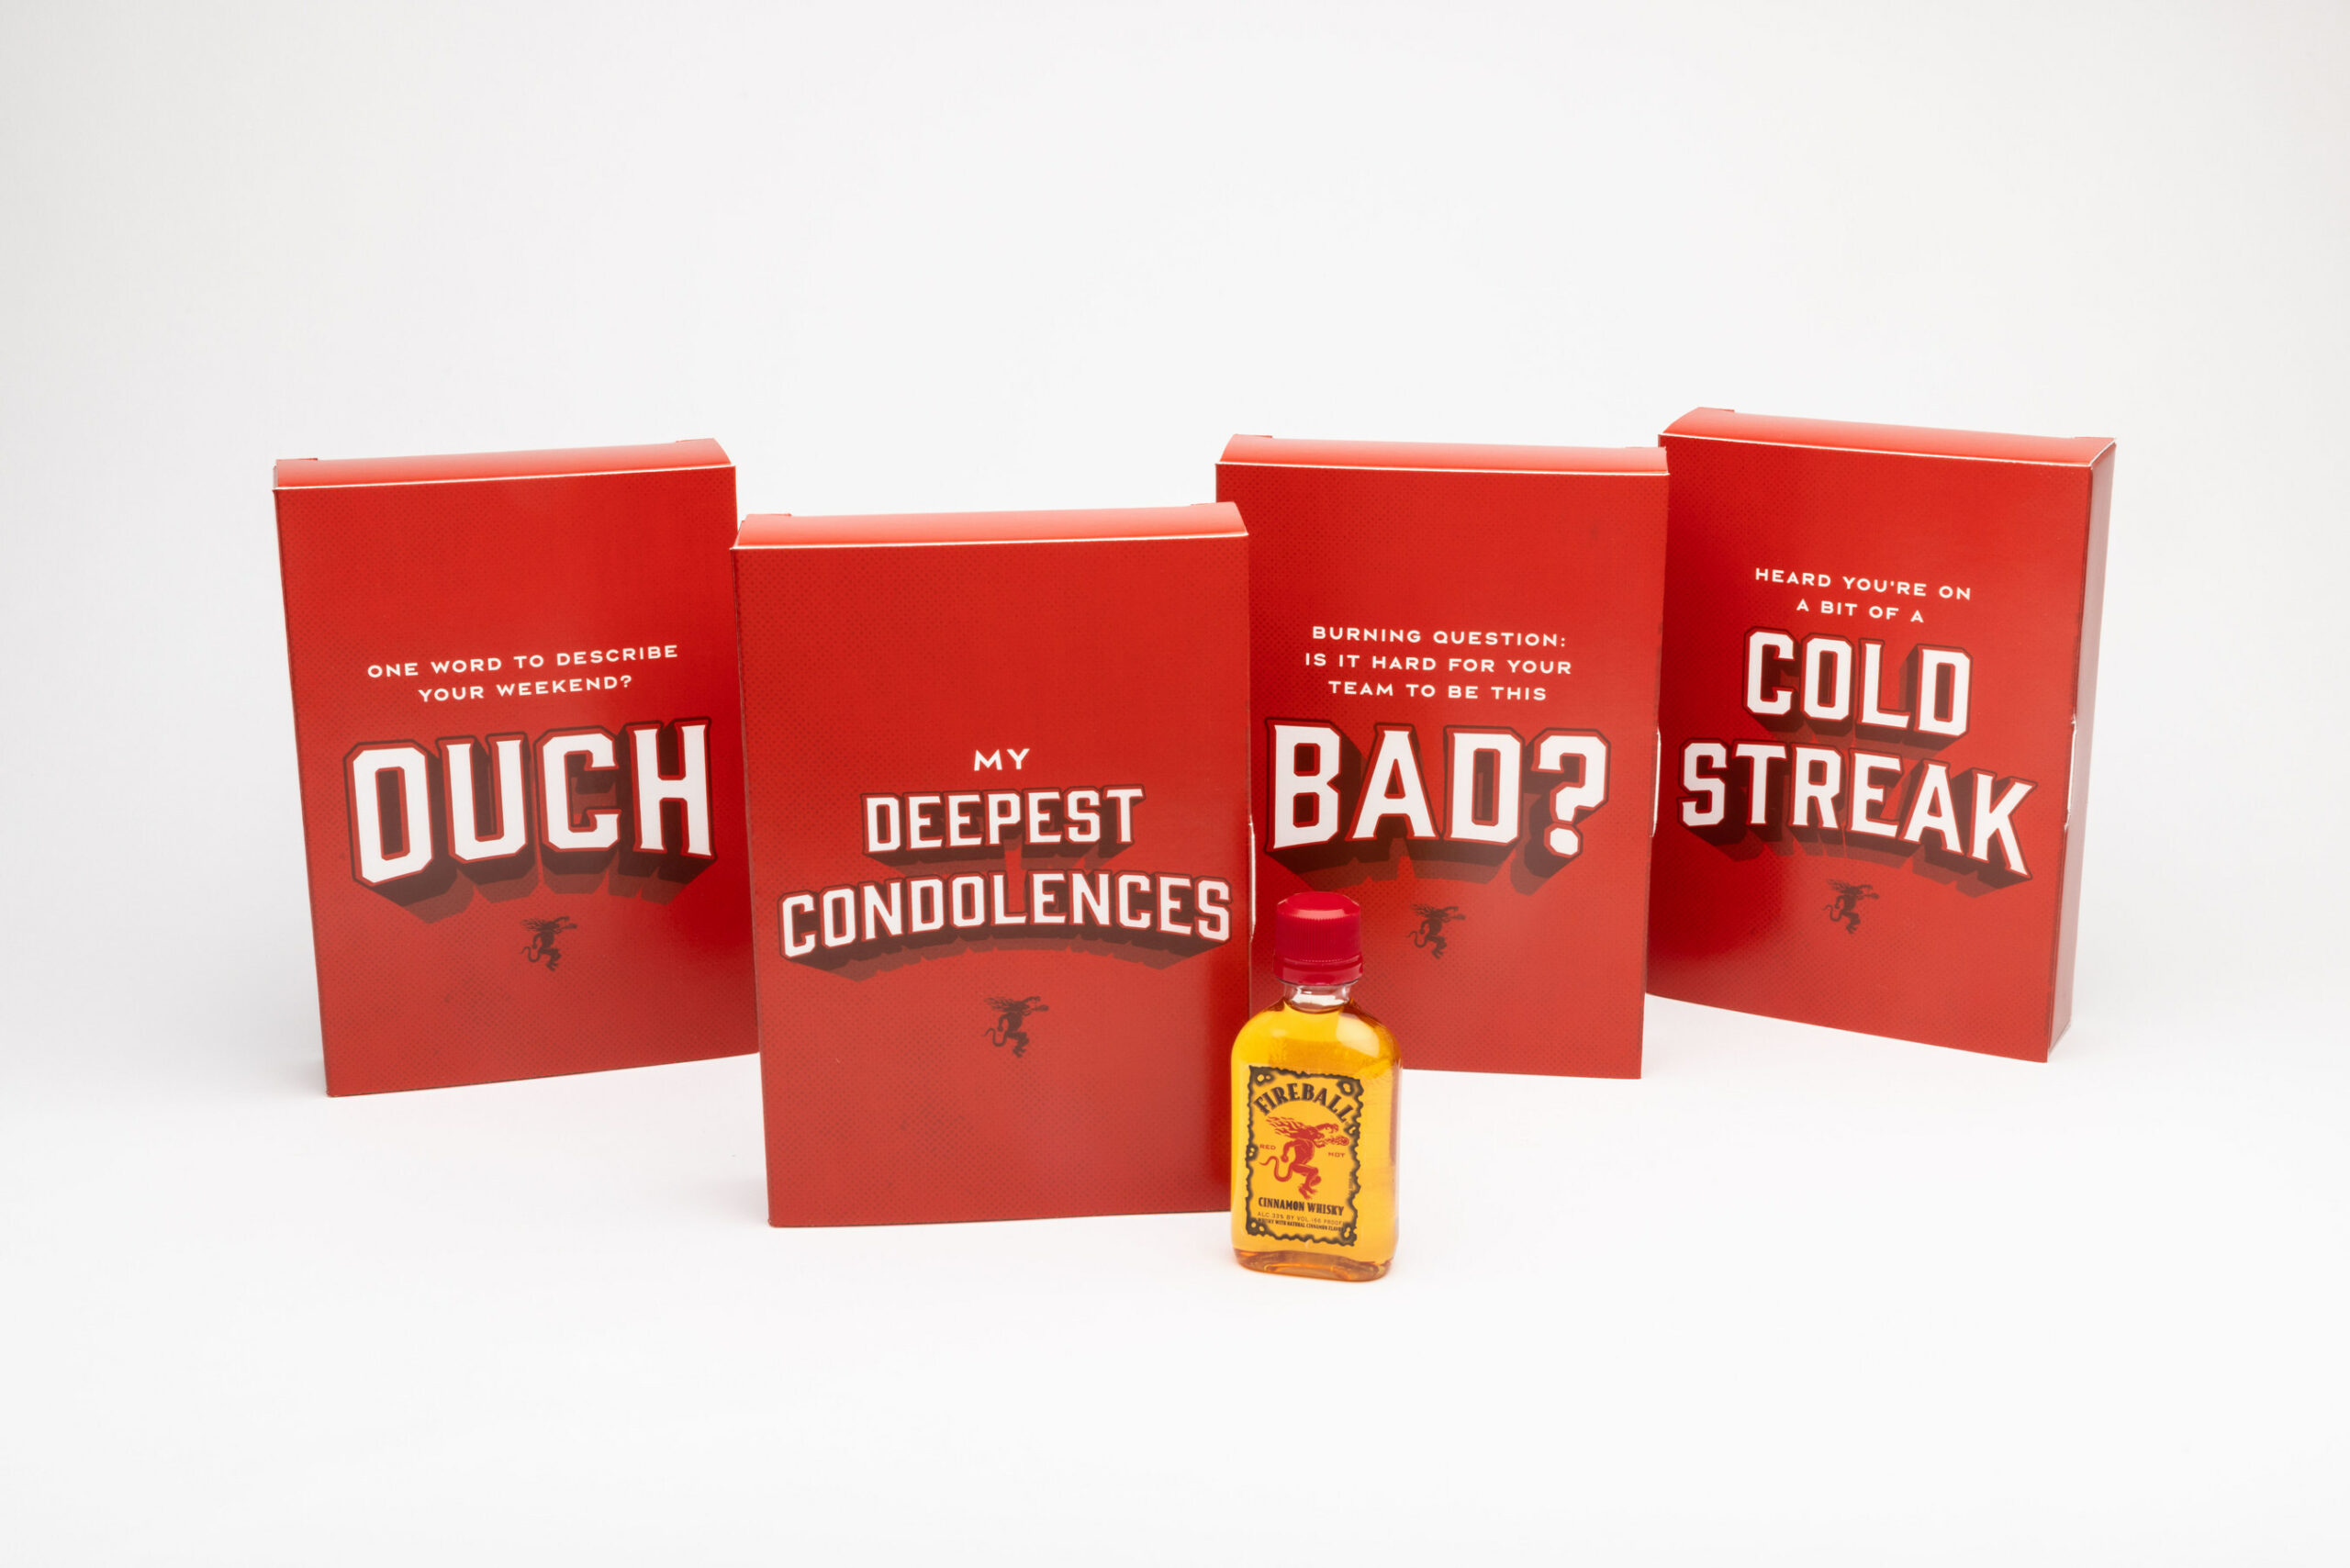 Fireball Whisky Introduces Hilarious Way To Roast Your Football-Loving Friends